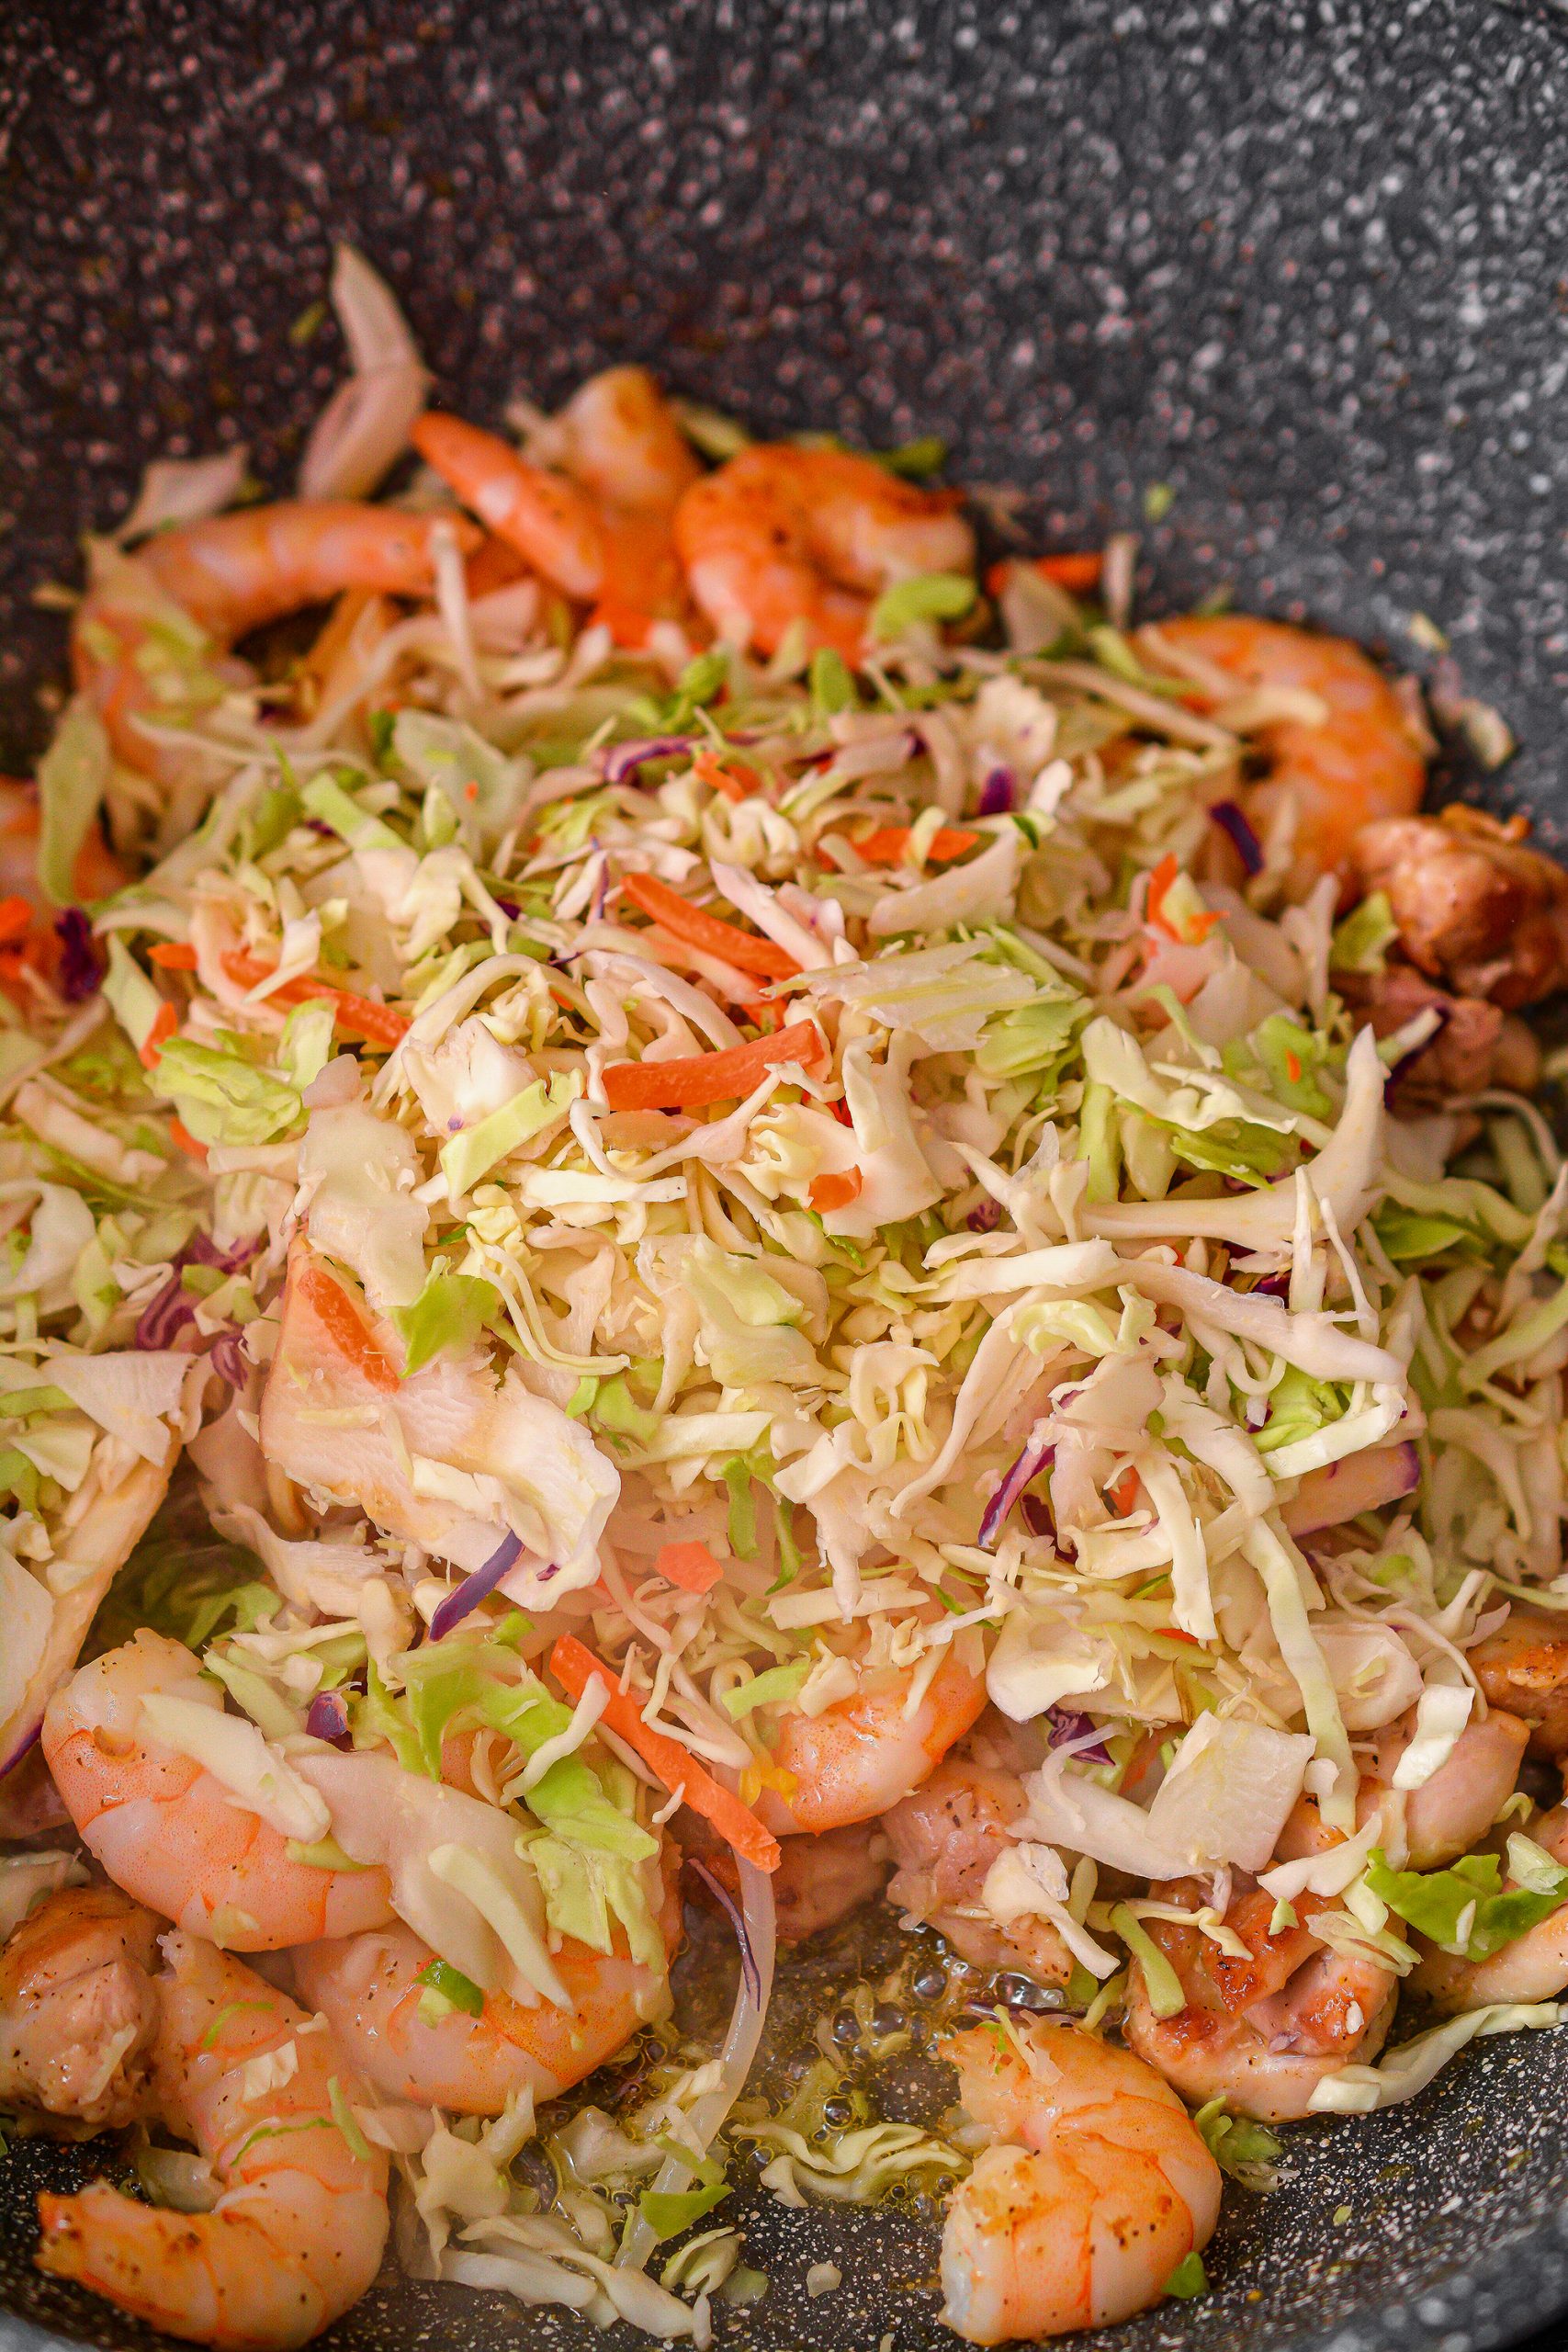 Reduce the heat to medium and stir in the coleslaw mix, bean sprouts and stir fry noodles.